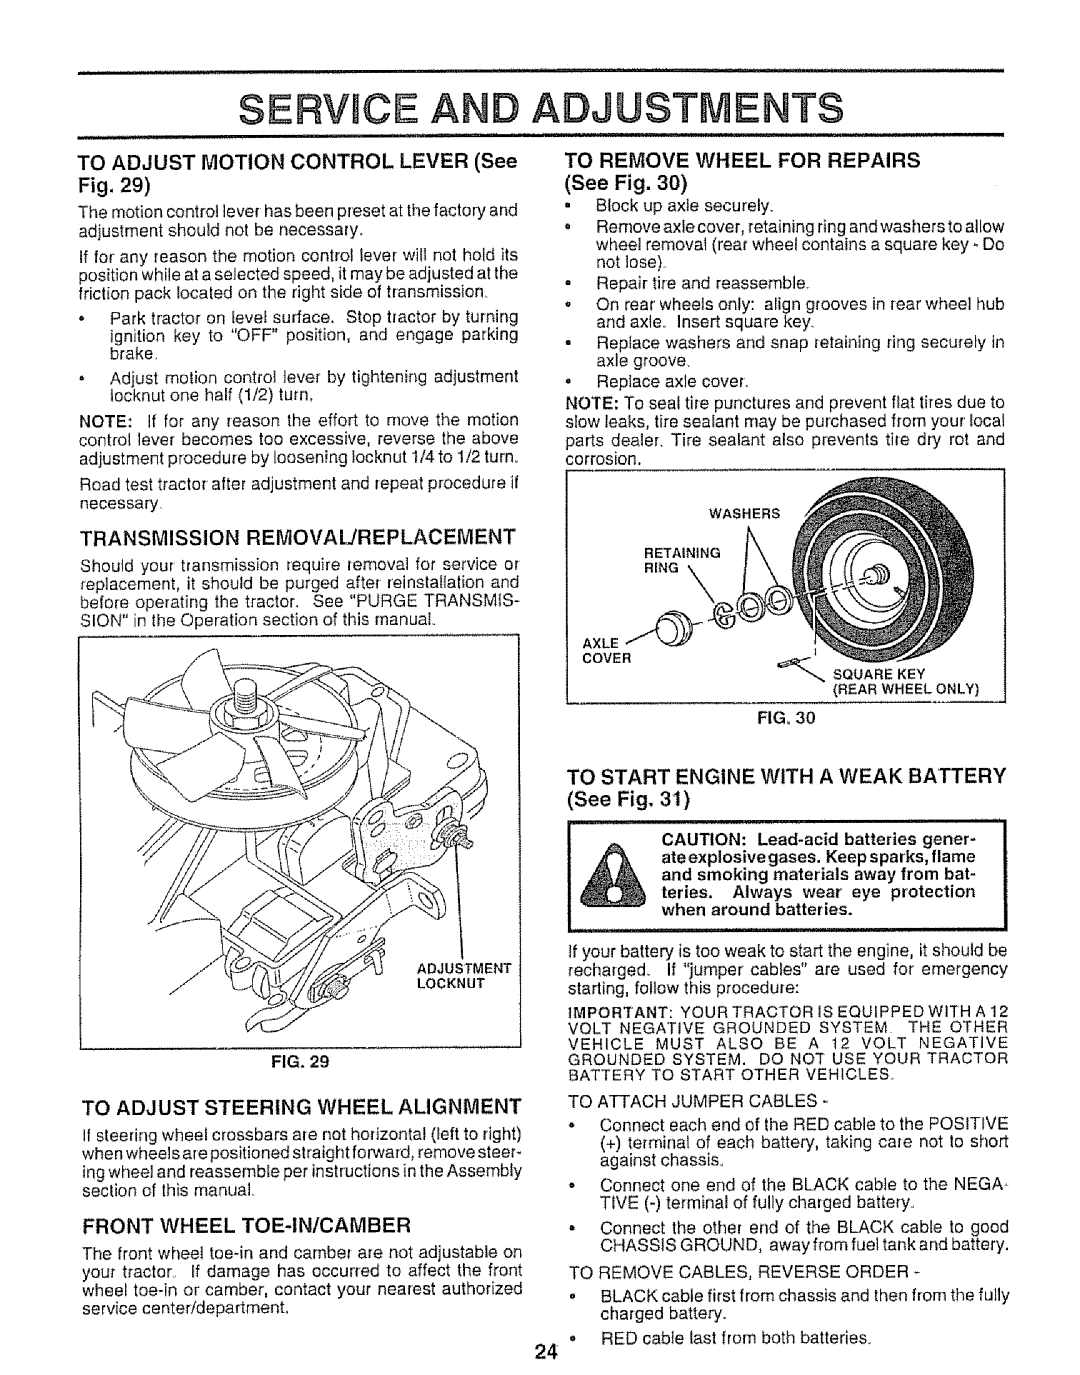 Sears 917.25953 Service An Adjustments, TO ADJUST MOTION CONTROL LEVER See Fig, TO REMOVE WHEEL FOR REPAIRS See Fig 